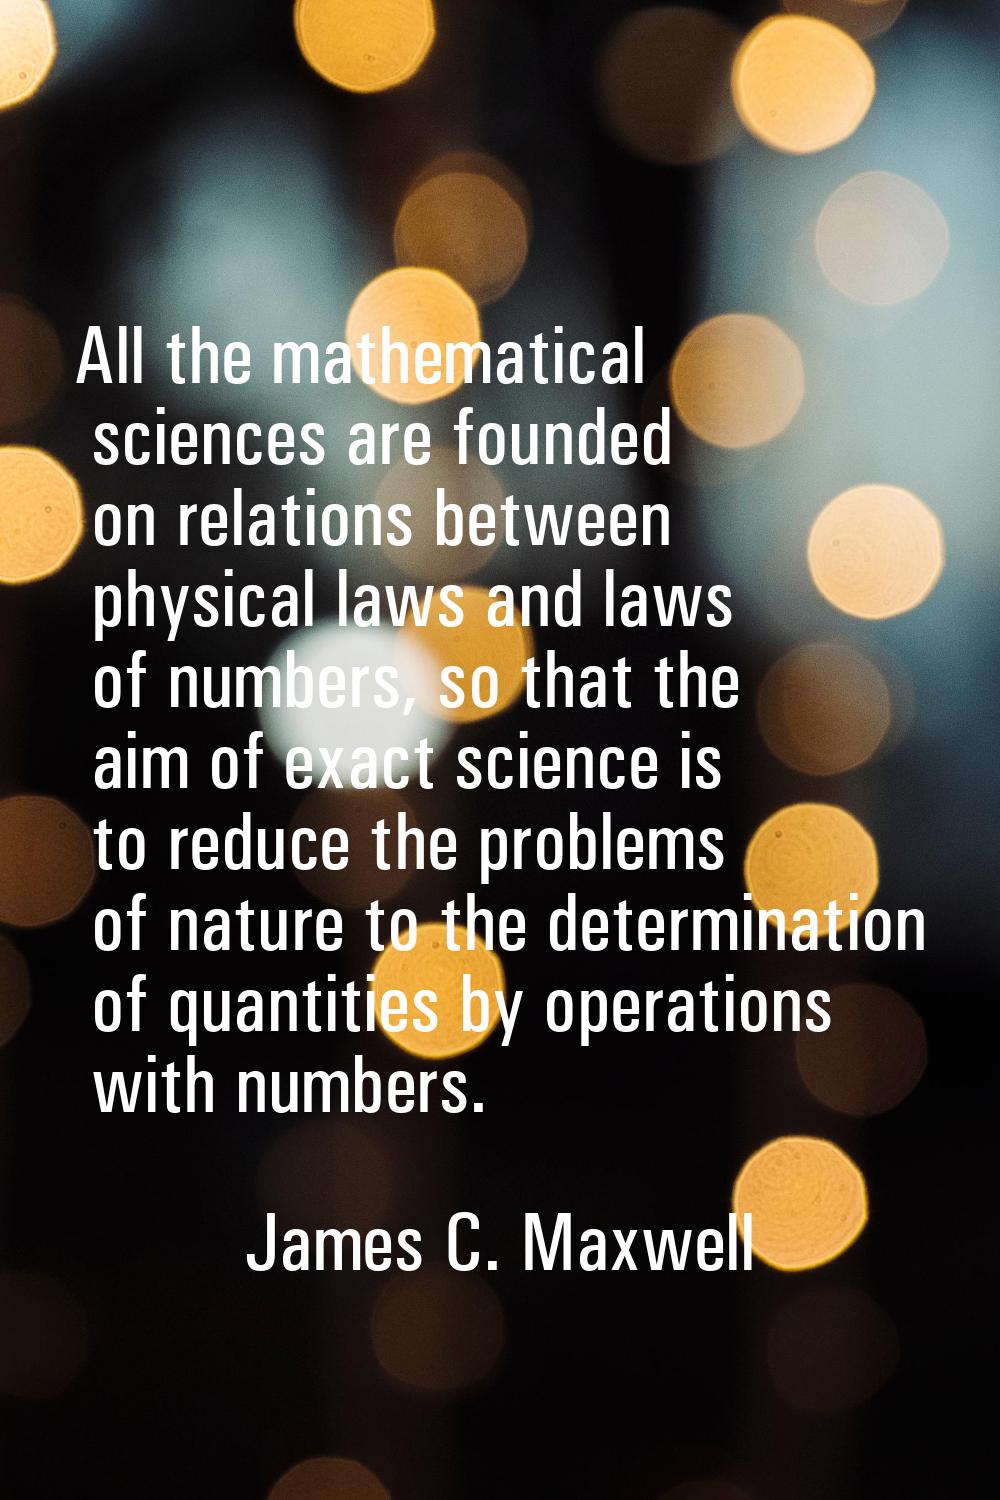 All the mathematical sciences are founded on relations between physical laws and laws of numbers, s